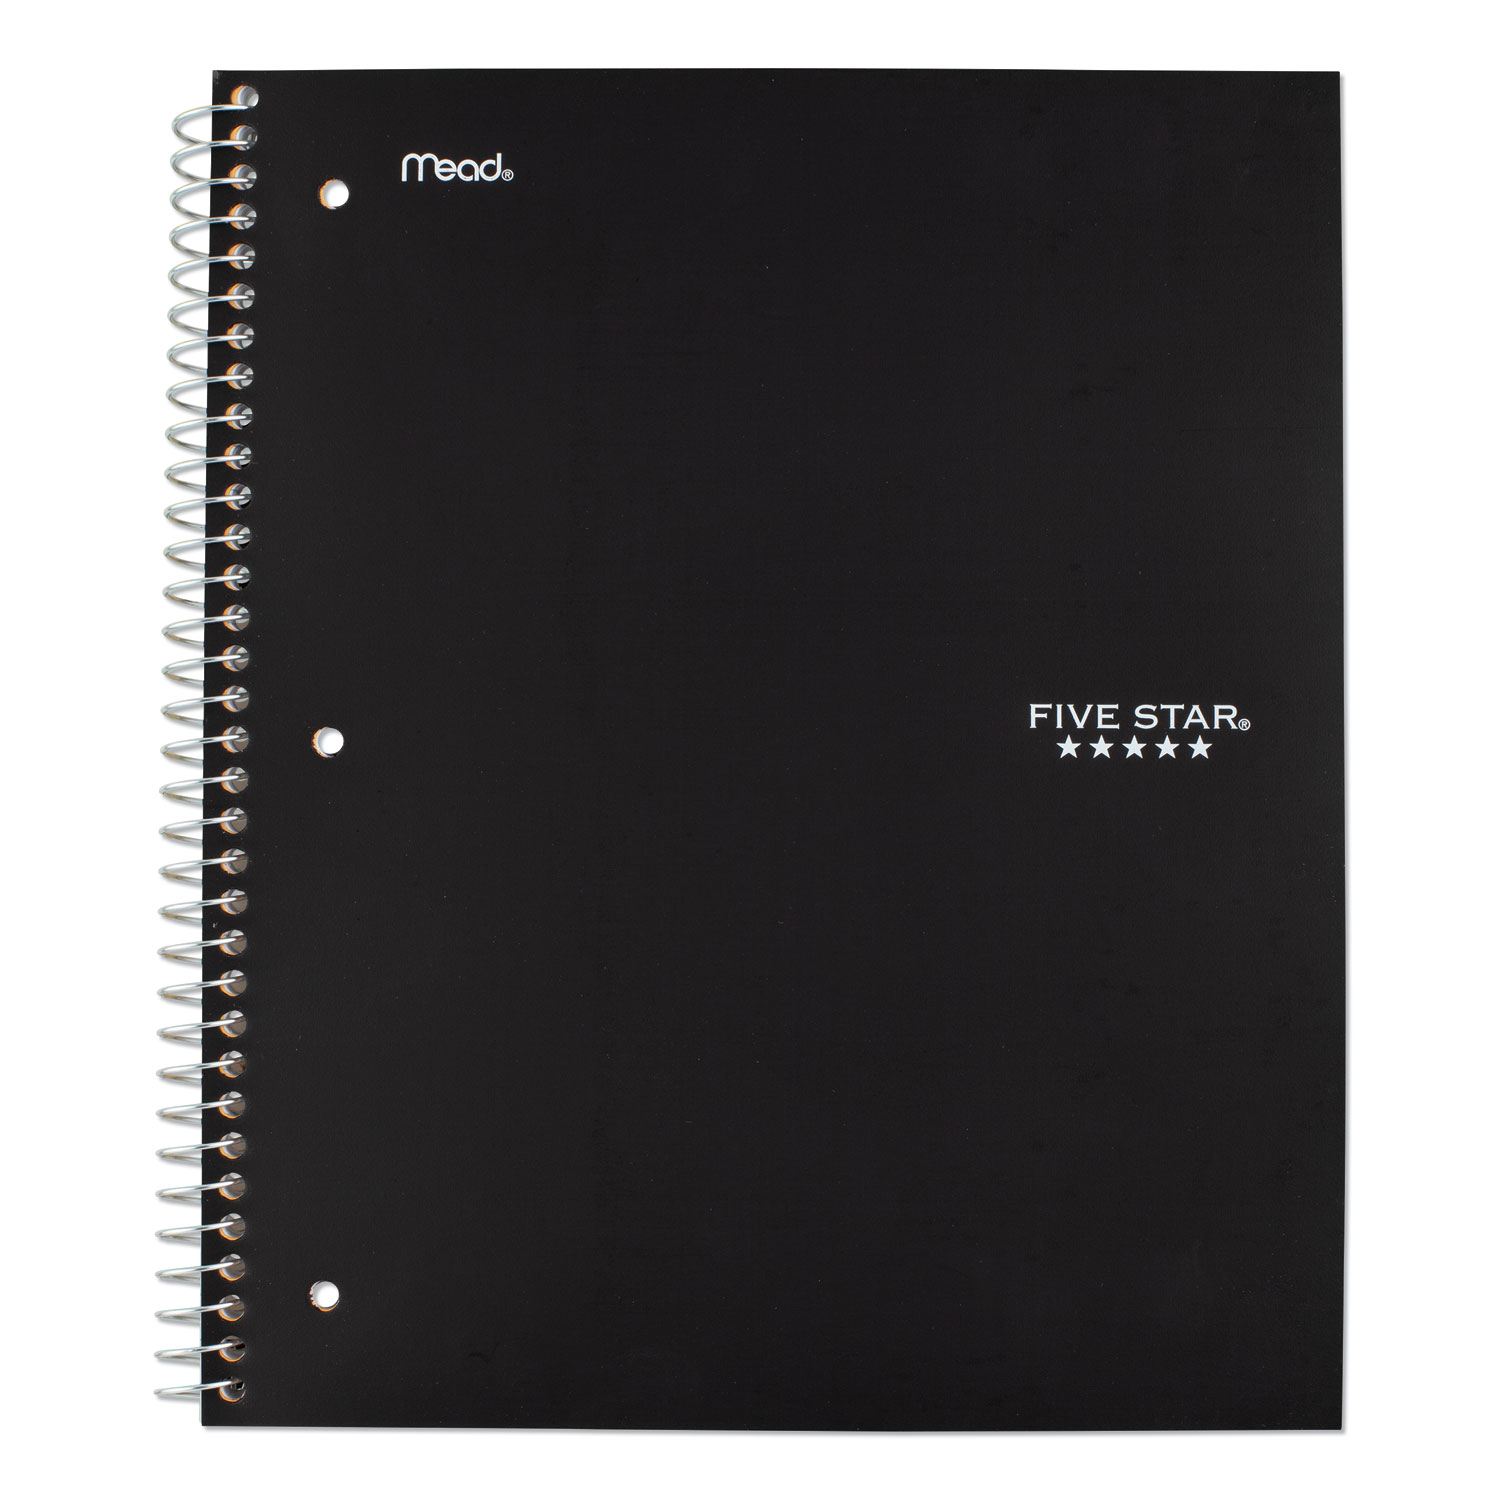  Five Star 72057 Wirebound Notebook, 1 Subject, Medium/College Rule, Black Cover, 11 x 8.5, 100 Sheets (MEA72057) 